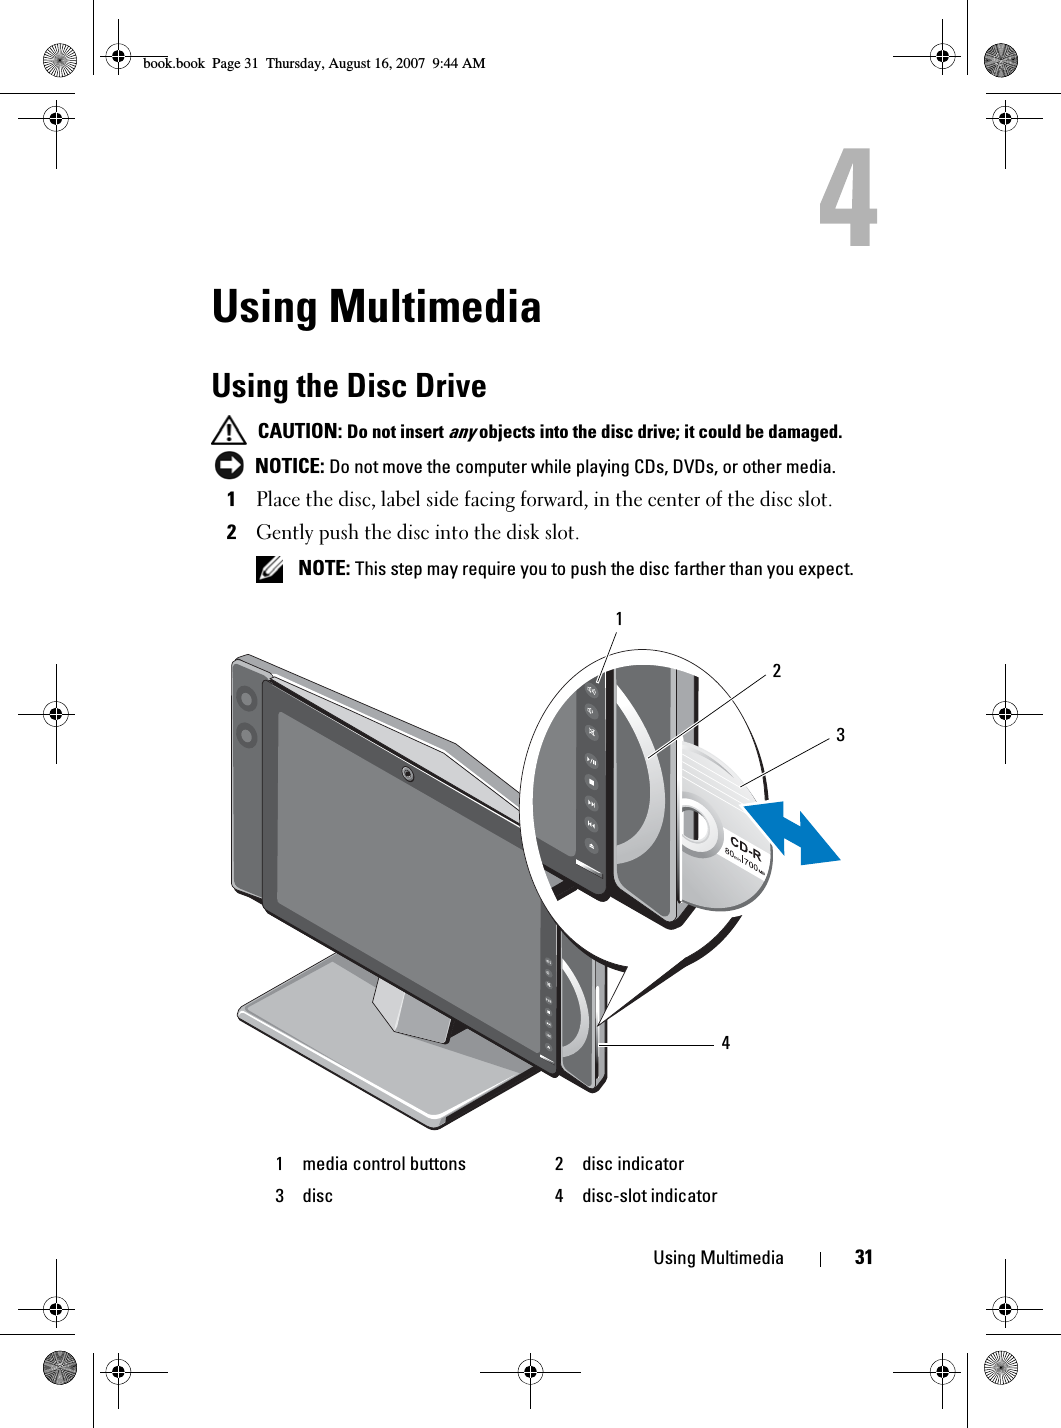 Using Multimedia 31Using MultimediaUsing the Disc Drive CAUTION: Do not insert any objects into the disc drive; it could be damaged. NOTICE: Do not move the computer while playing CDs, DVDs, or other media.1Place the disc, label side facing forward, in the center of the disc slot.2Gently push the disc into the disk slot. NOTE: This step may require you to push the disc farther than you expect.1 media control buttons 2 disc indicator3 disc 4 disc-slot indicator2413book.book  Page 31  Thursday, August 16, 2007  9:44 AM